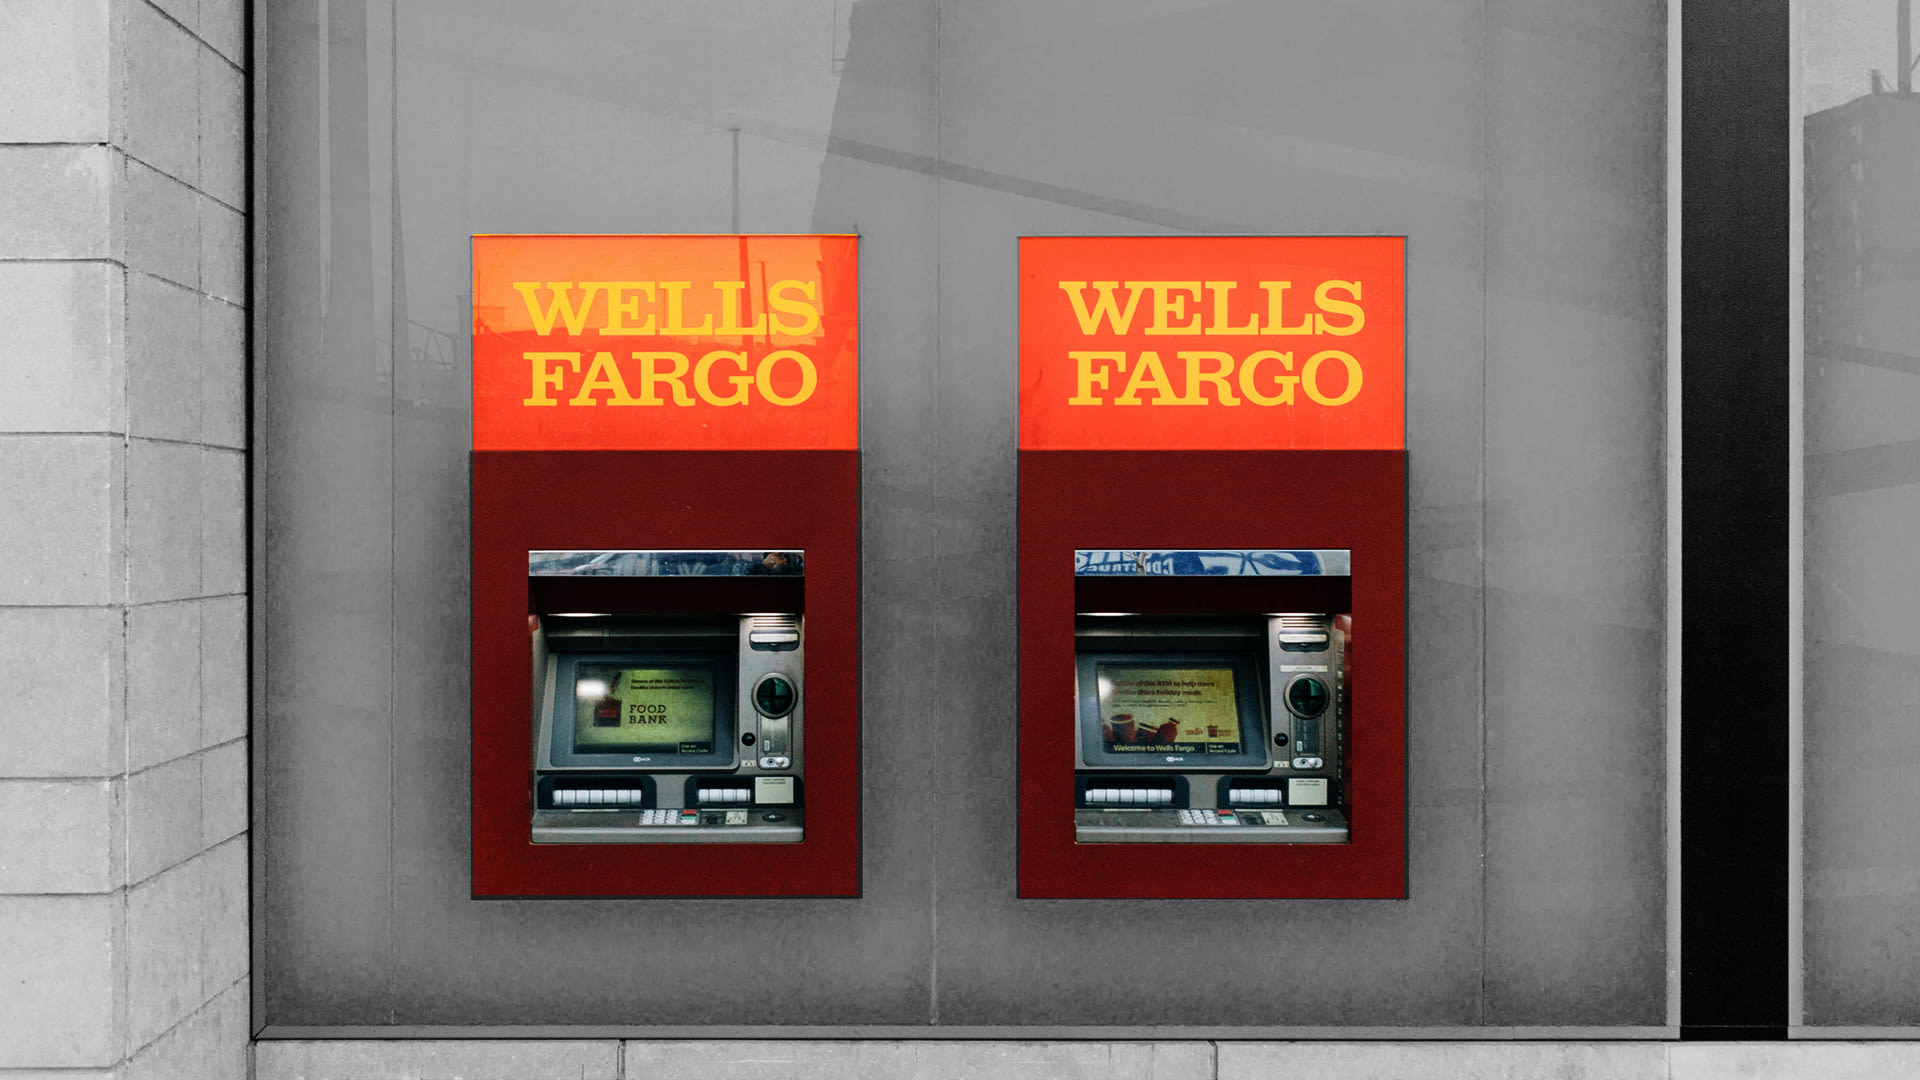 COVID-19: Wells Fargo has already stopped accepting Paycheck Protection Program loan requests